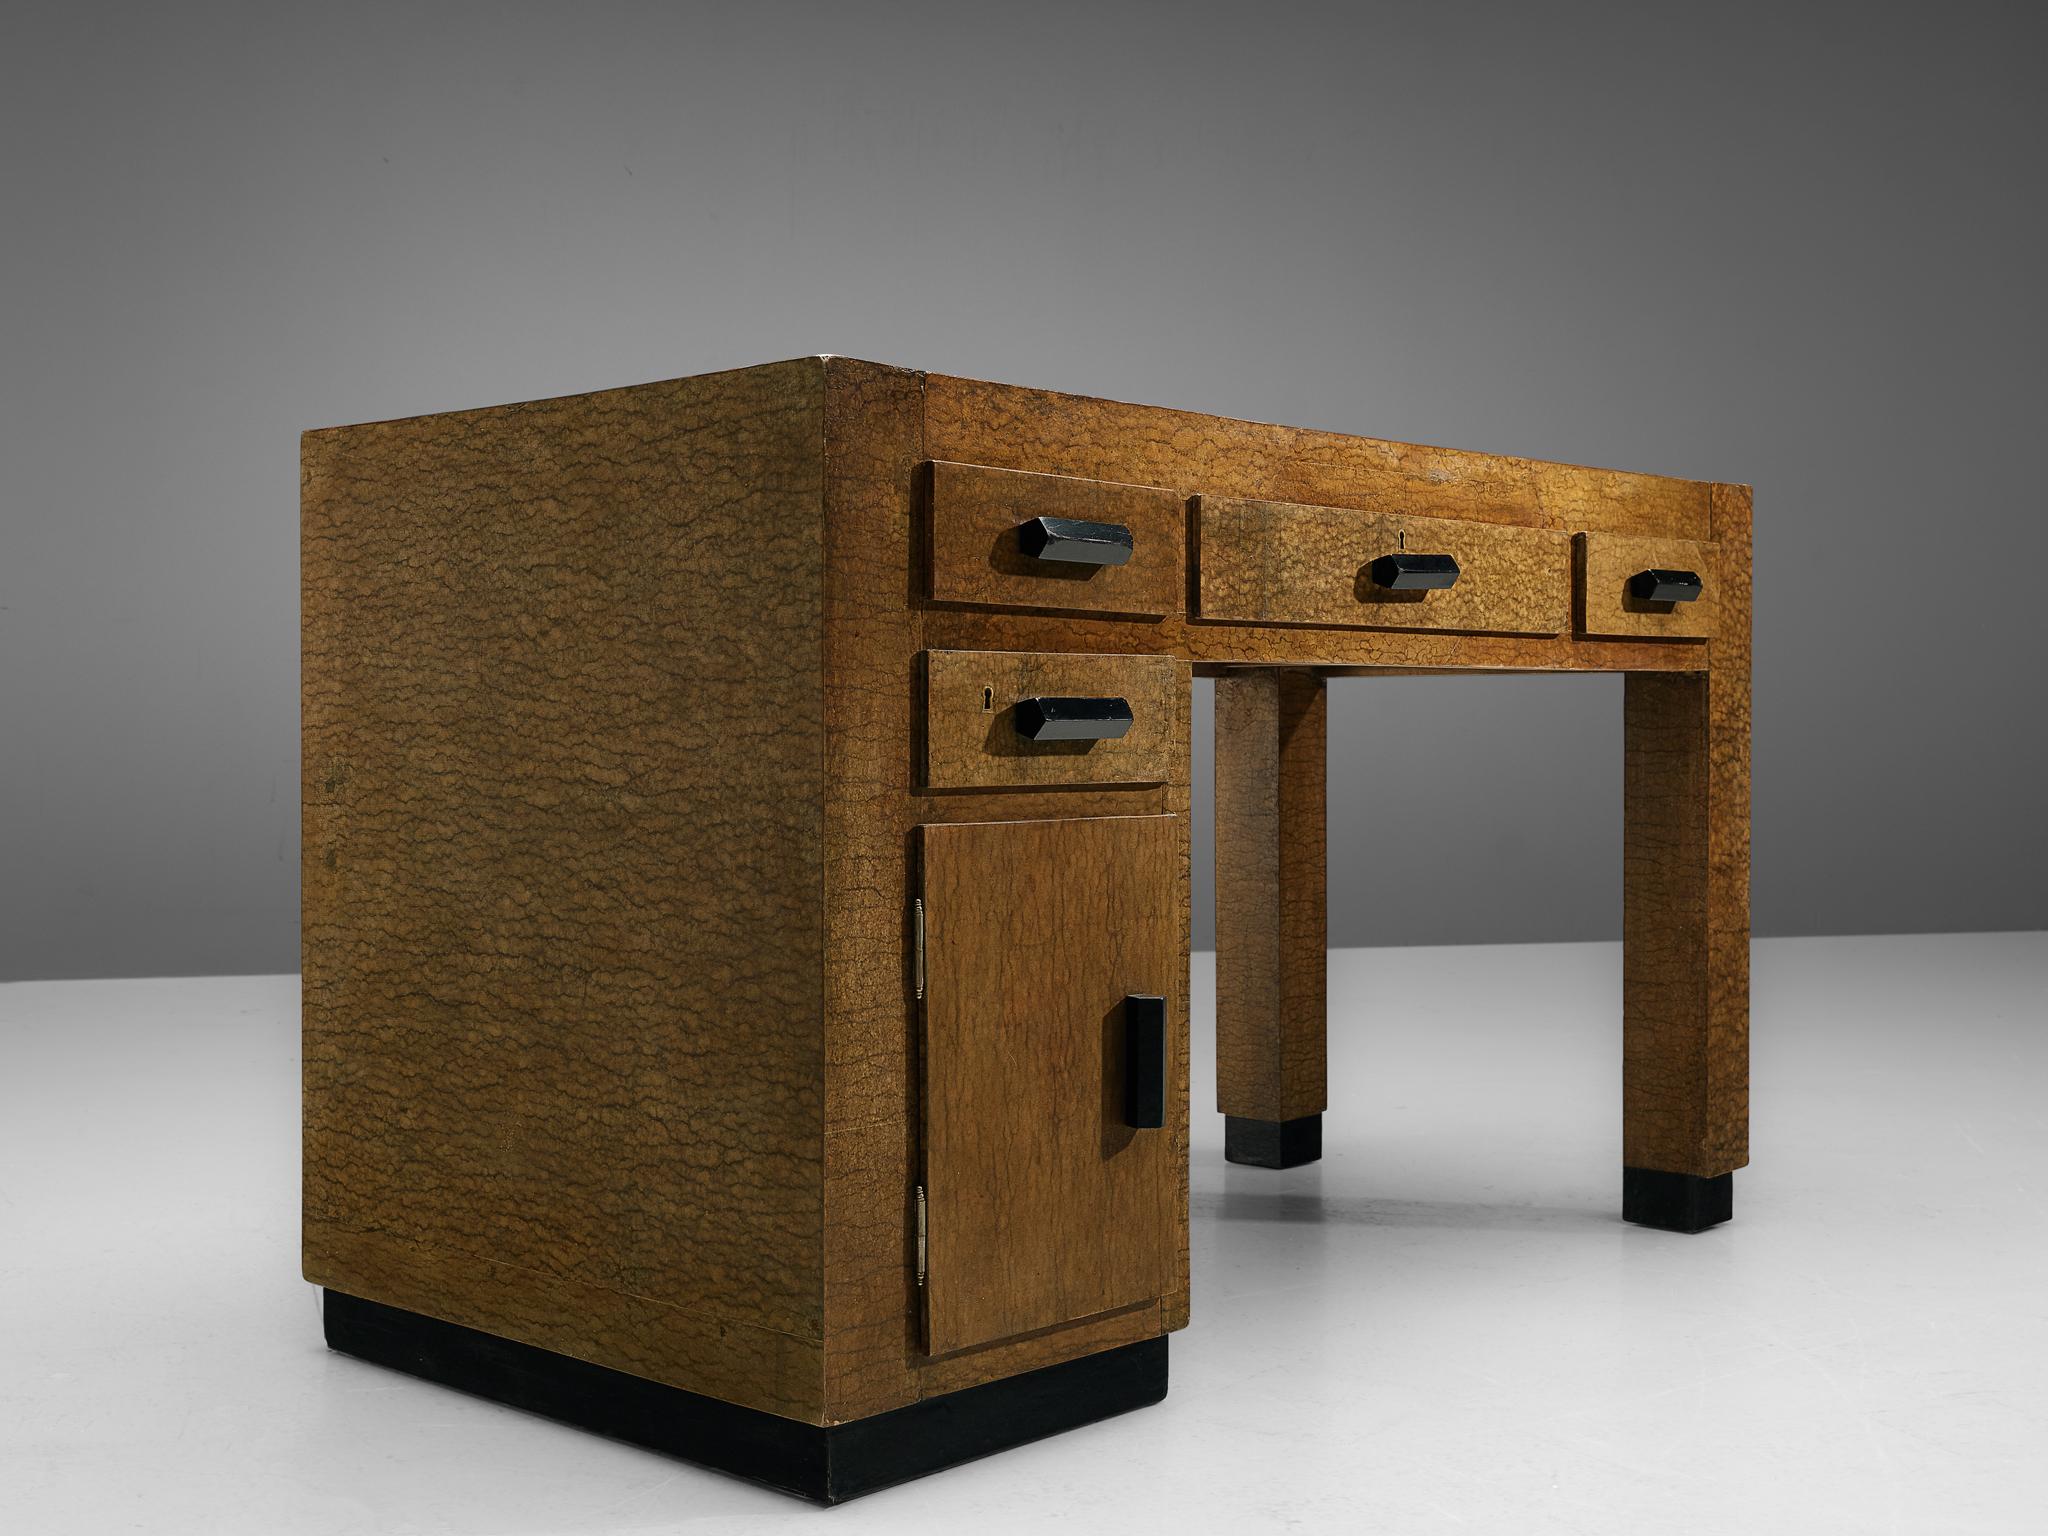 Giuseppe Pagano and Gino Levi Montalcini for F.I.P. Torino, lacquered wood, buxus paper, brass, Italy, 1929.

This desk is designed by Pagano and Montalcini for Palazzo degli Uffici Gualino. This golden brown desk on a black base is part of a